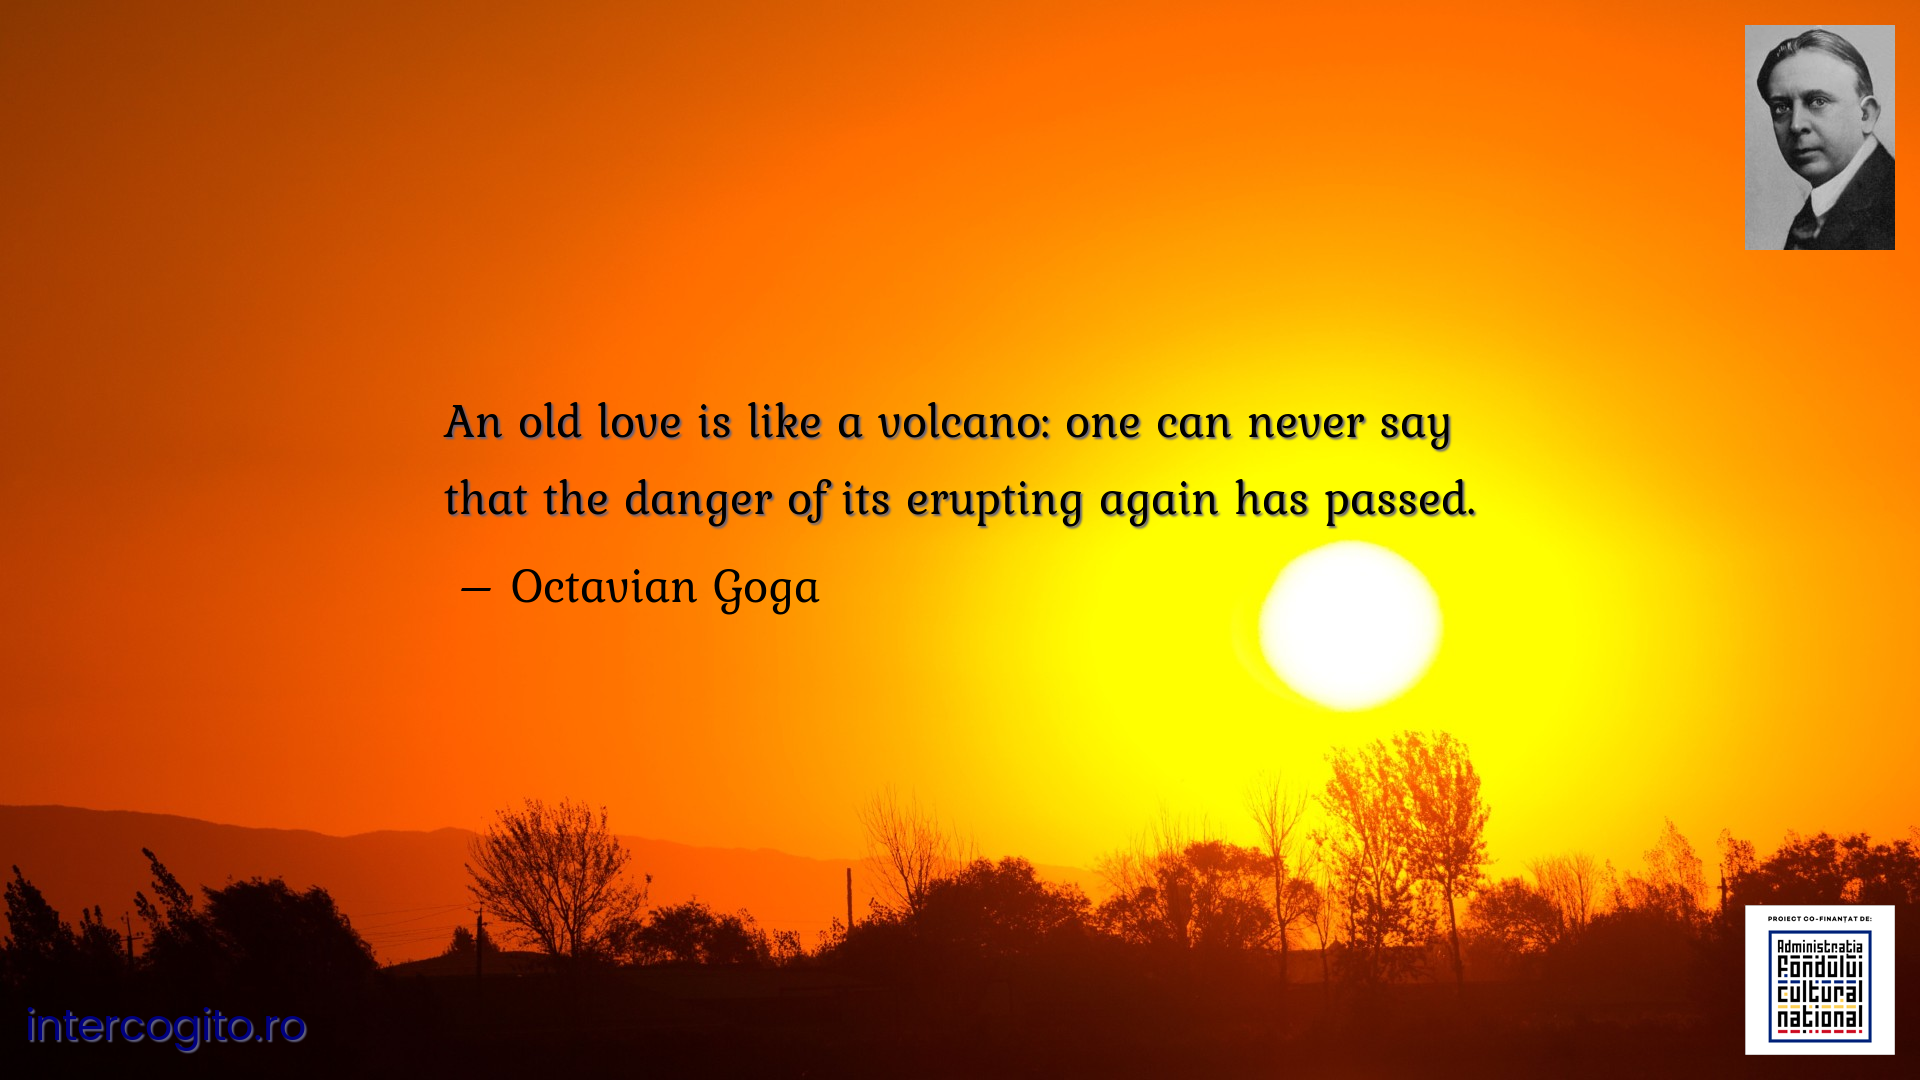 An old love is like a volcano: one can never say that the danger of its erupting again has passed.